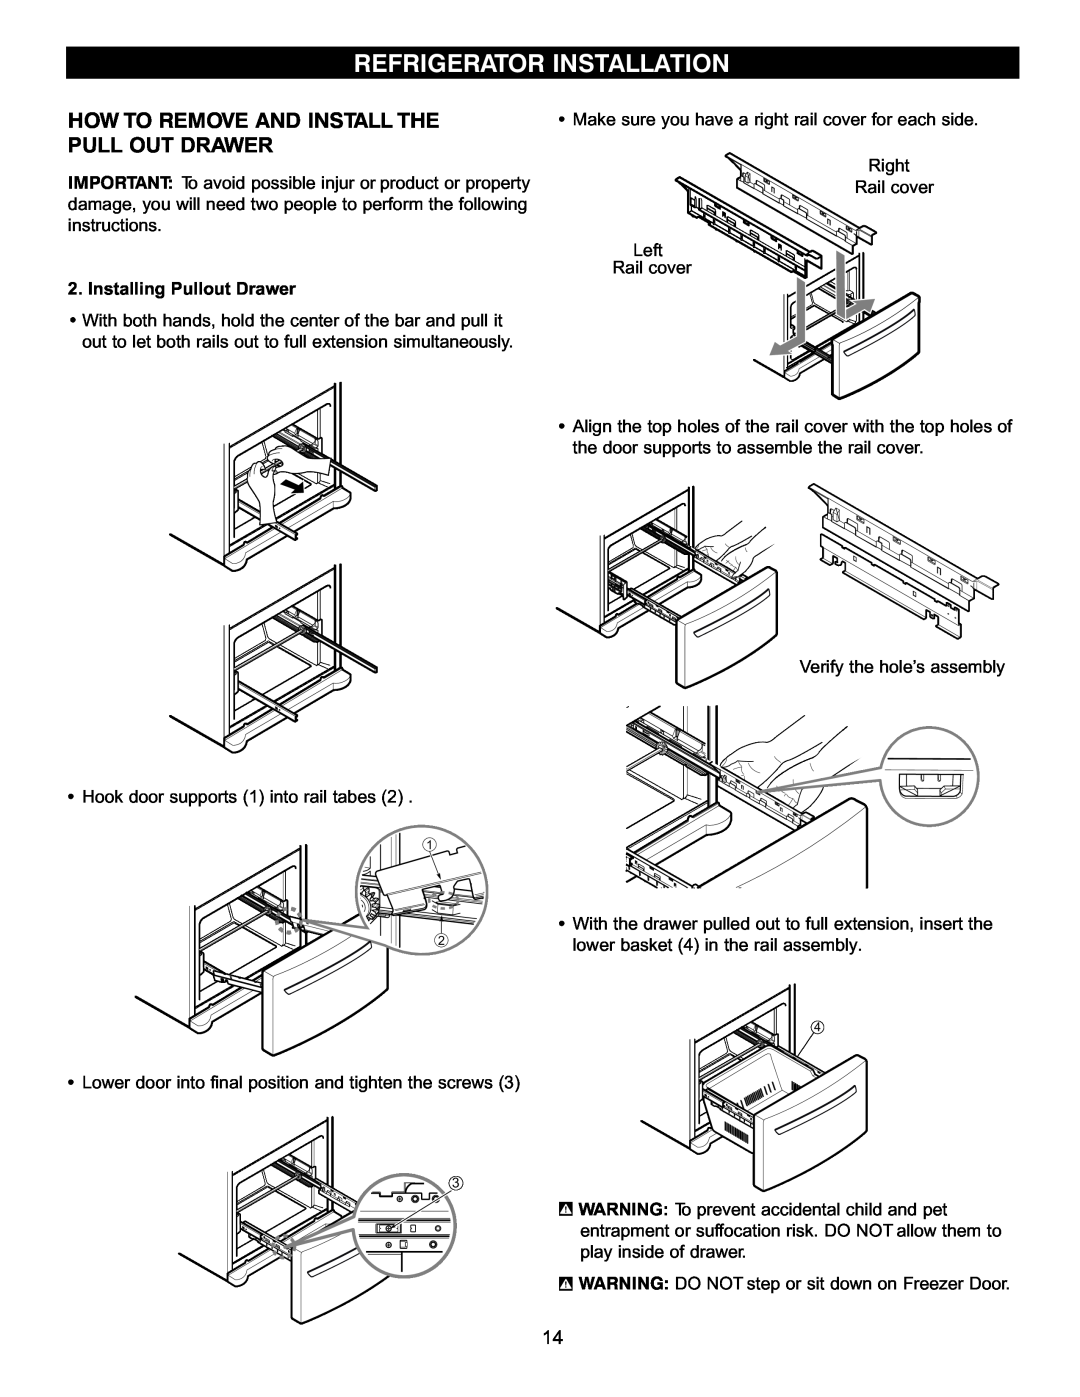 LG Electronics LBC2252 How To Remove And Install The Pull Out Drawer, Refrigerator Installation, Installing Pullout Drawer 